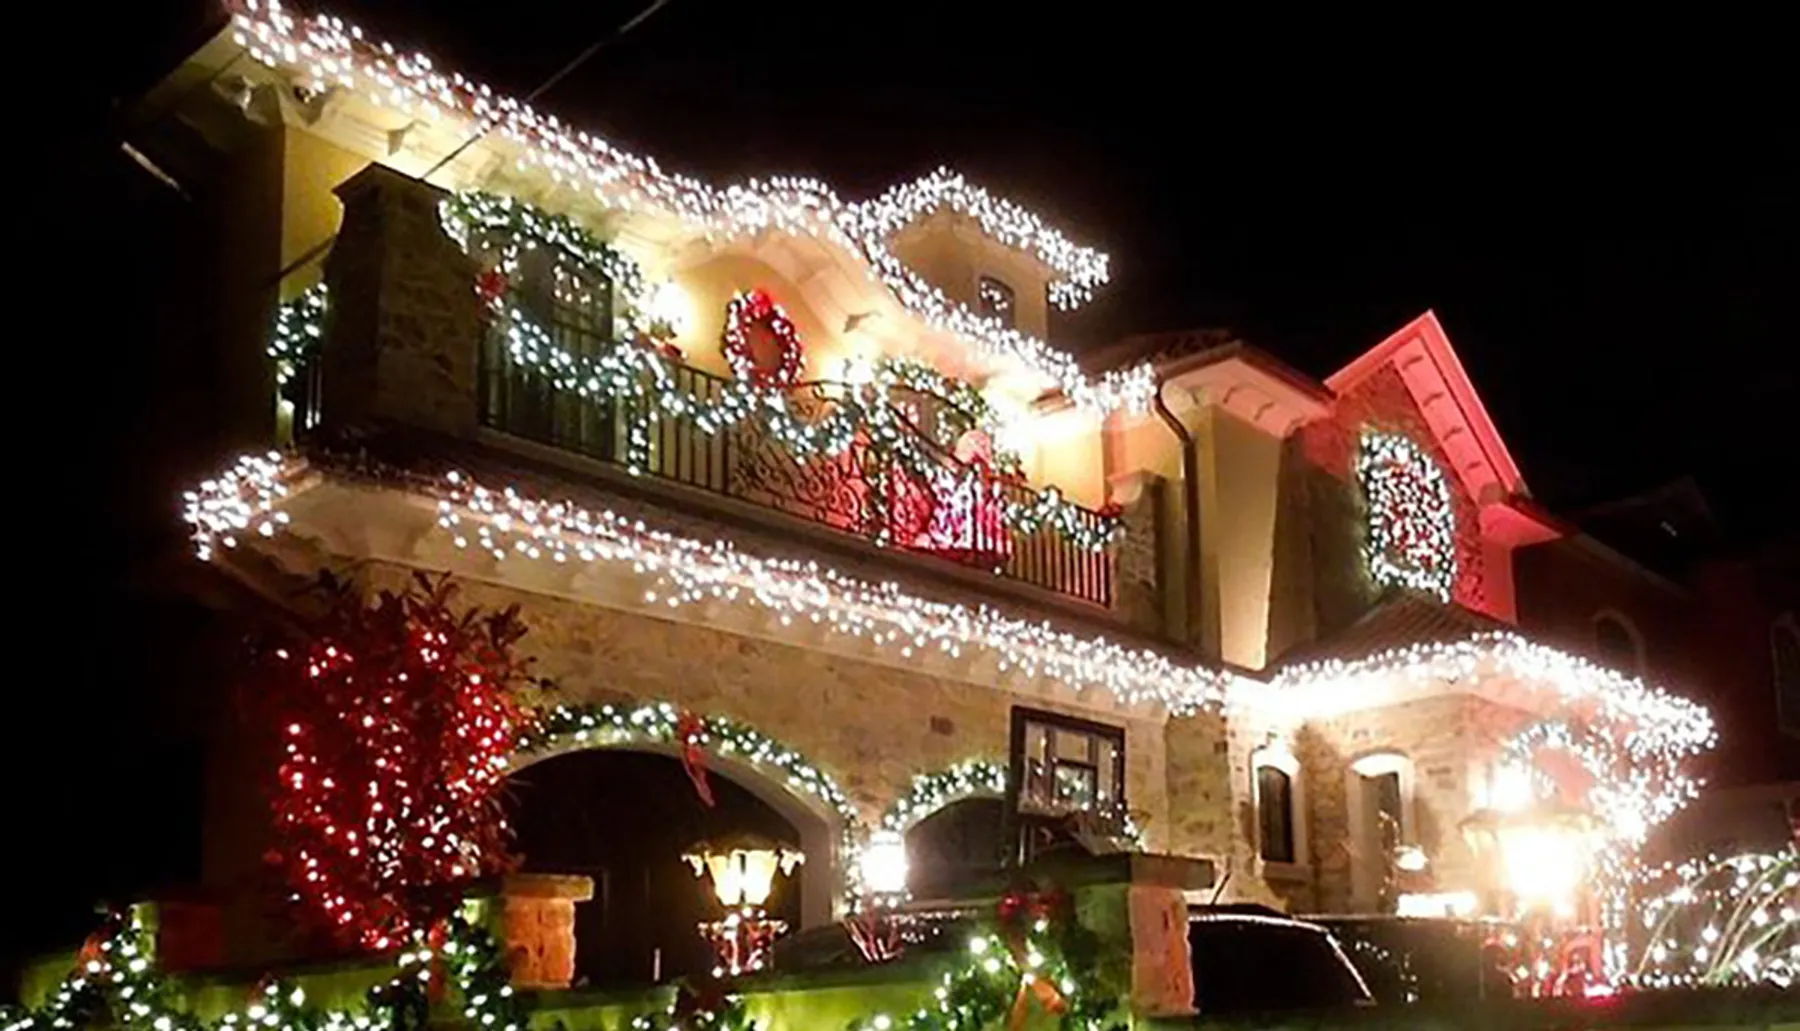 A house is festively adorned with numerous Christmas lights and decorations, creating a warm holiday atmosphere at night.